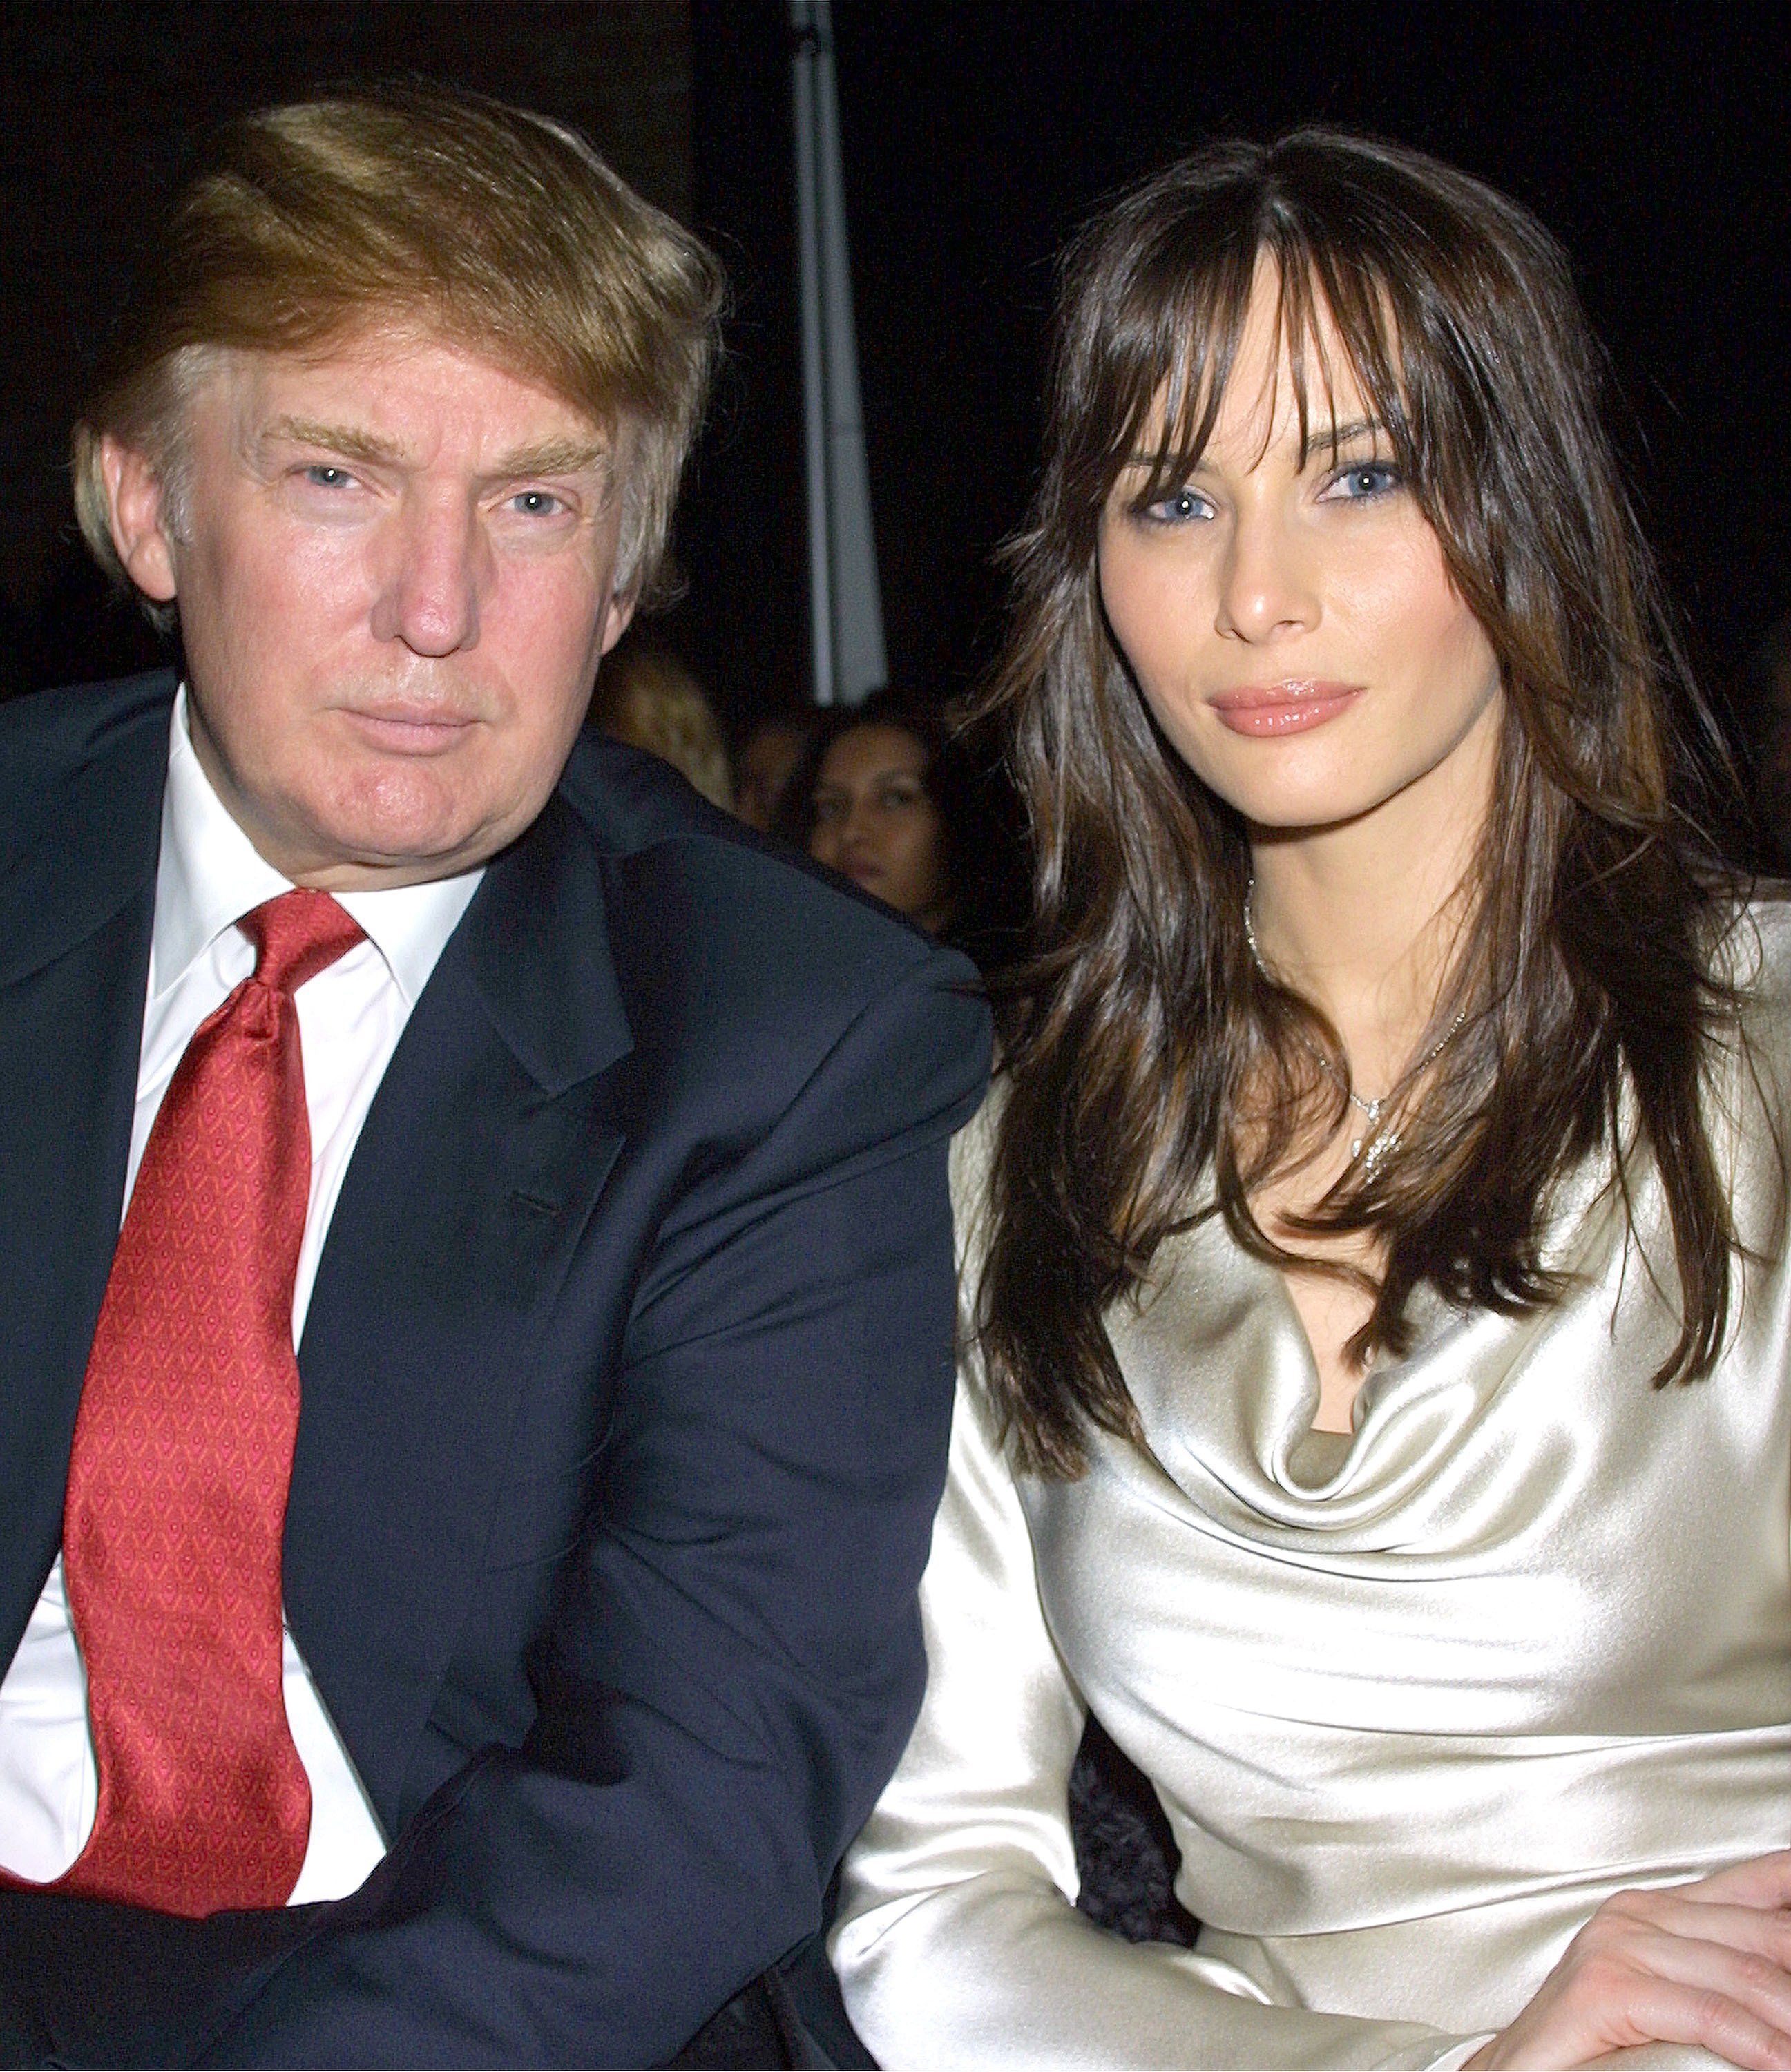 Donald Trump and his girlfriend Melania Knauss attend the Marc Bouwer/Peta Fall/Winter 2002 Collection show February 14, 2002 | Photo: GettyImages